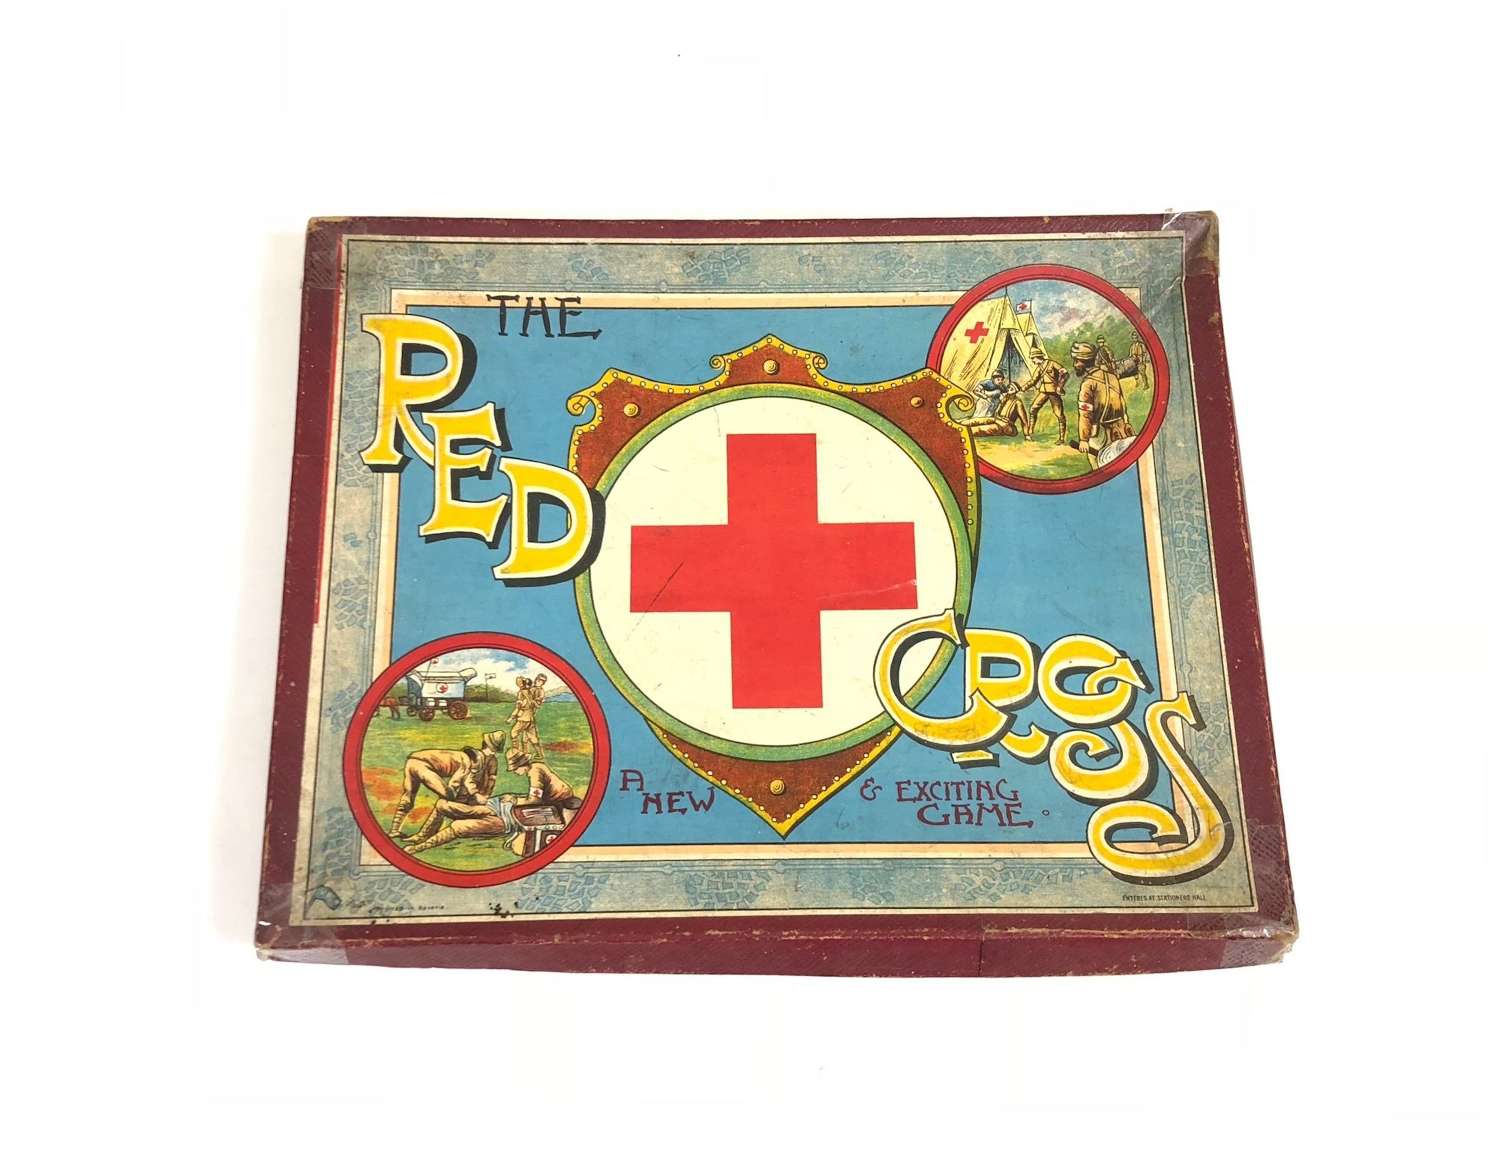 Victorian Boer War Period The Red Cross Game.